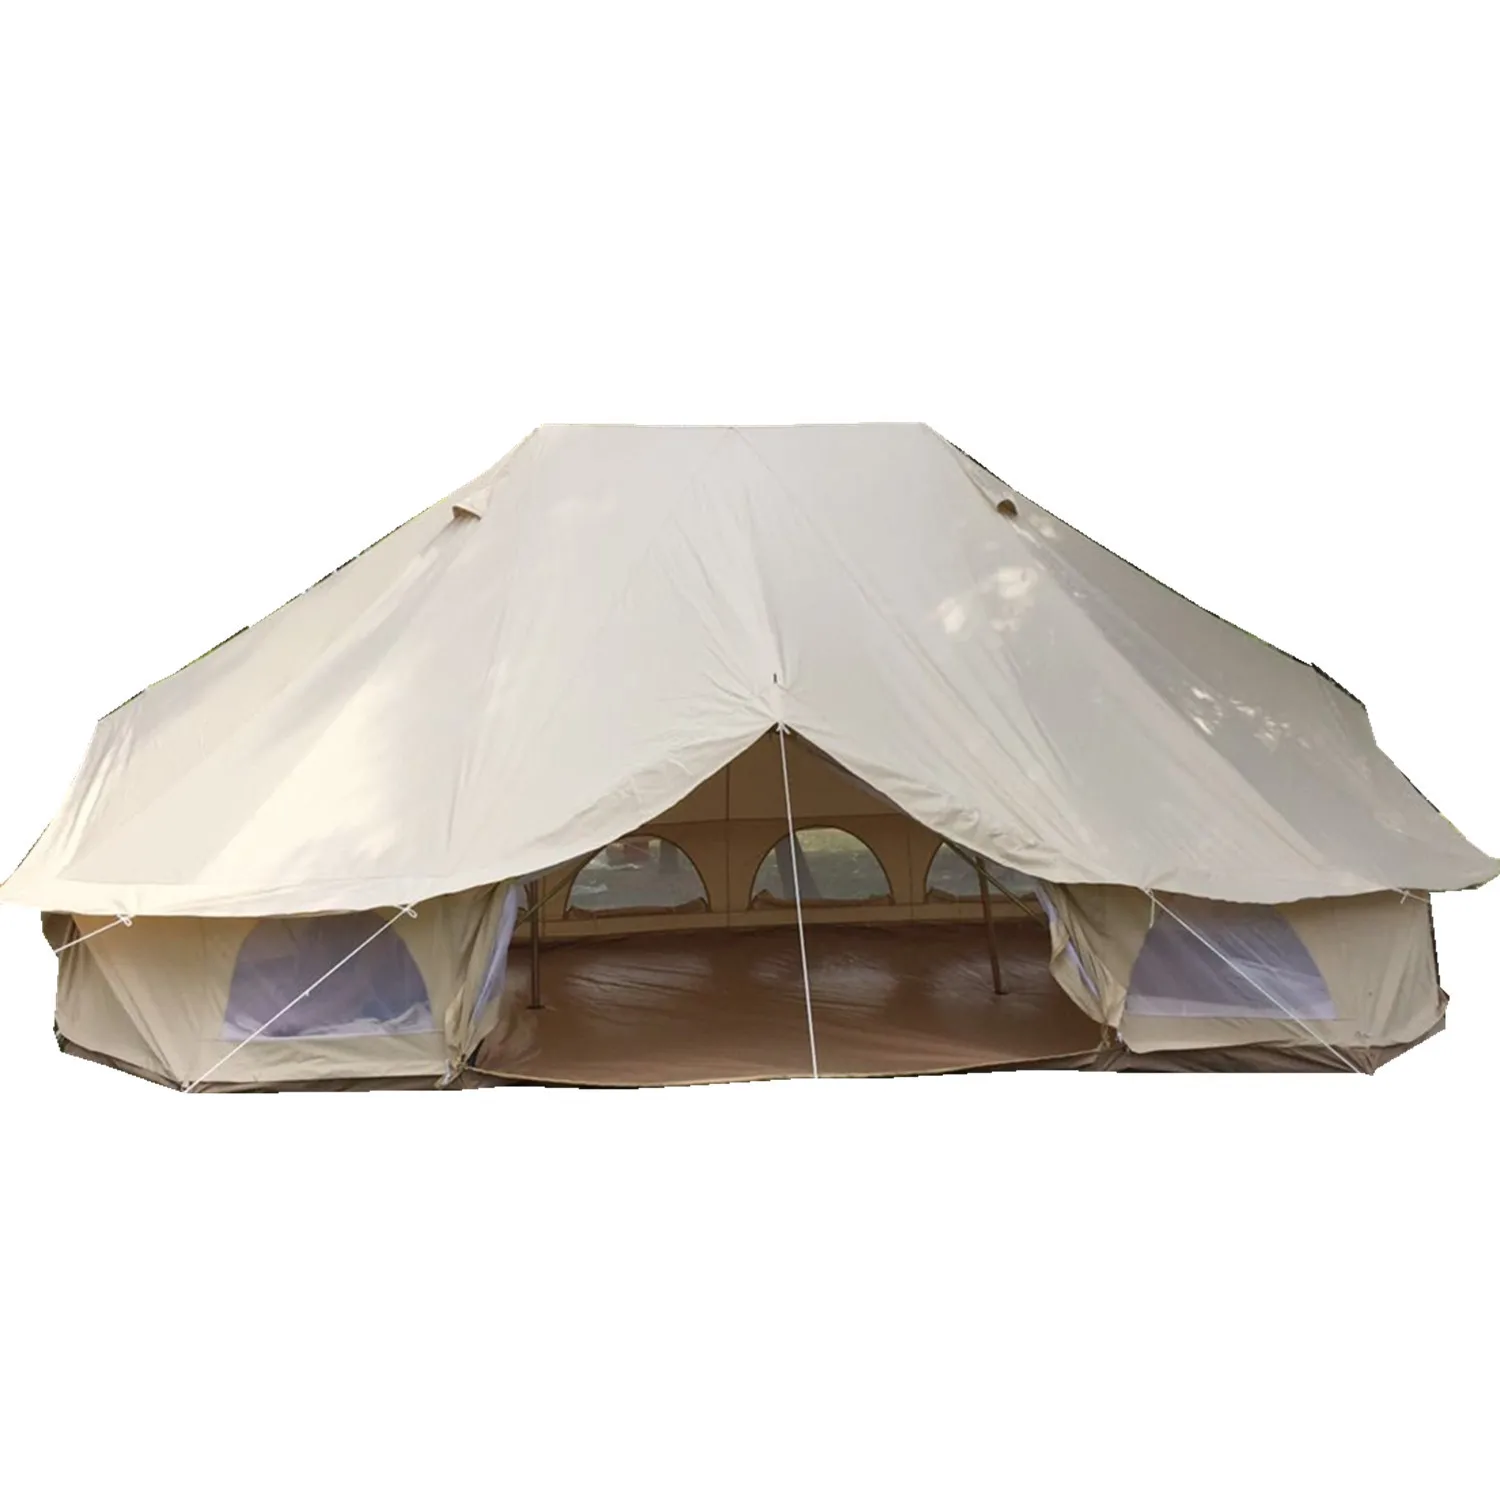 

Outdoor Four Season Family Camping and Winter Glamping Cotton Canvas Yurt Bell Tent with Mosquito Screen Door, White